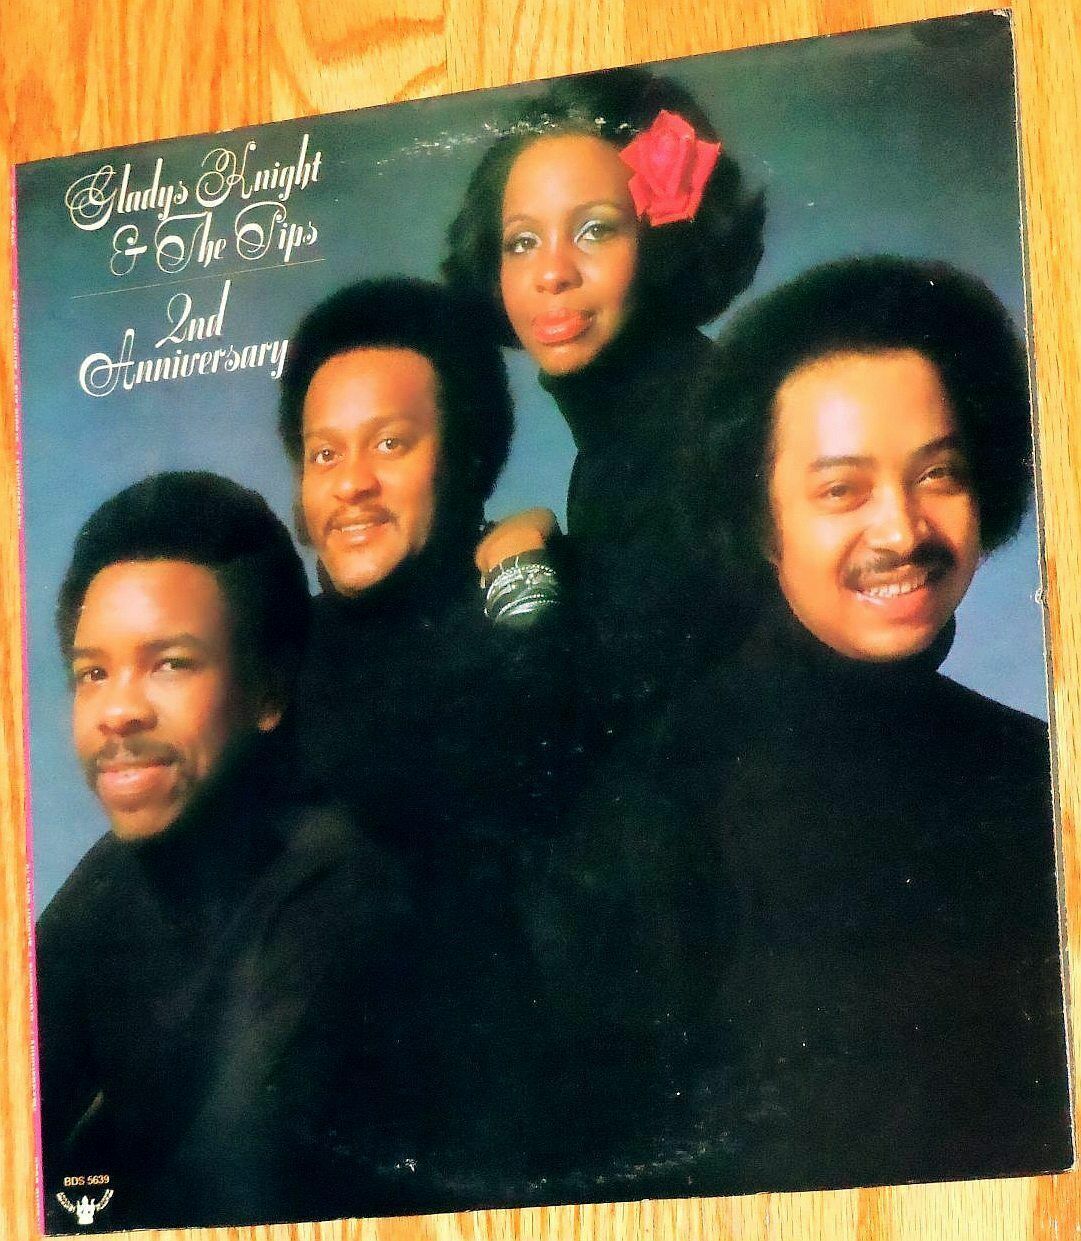 Gladys Knight And The Pips - 2nd Anniversary   VINYL LP 